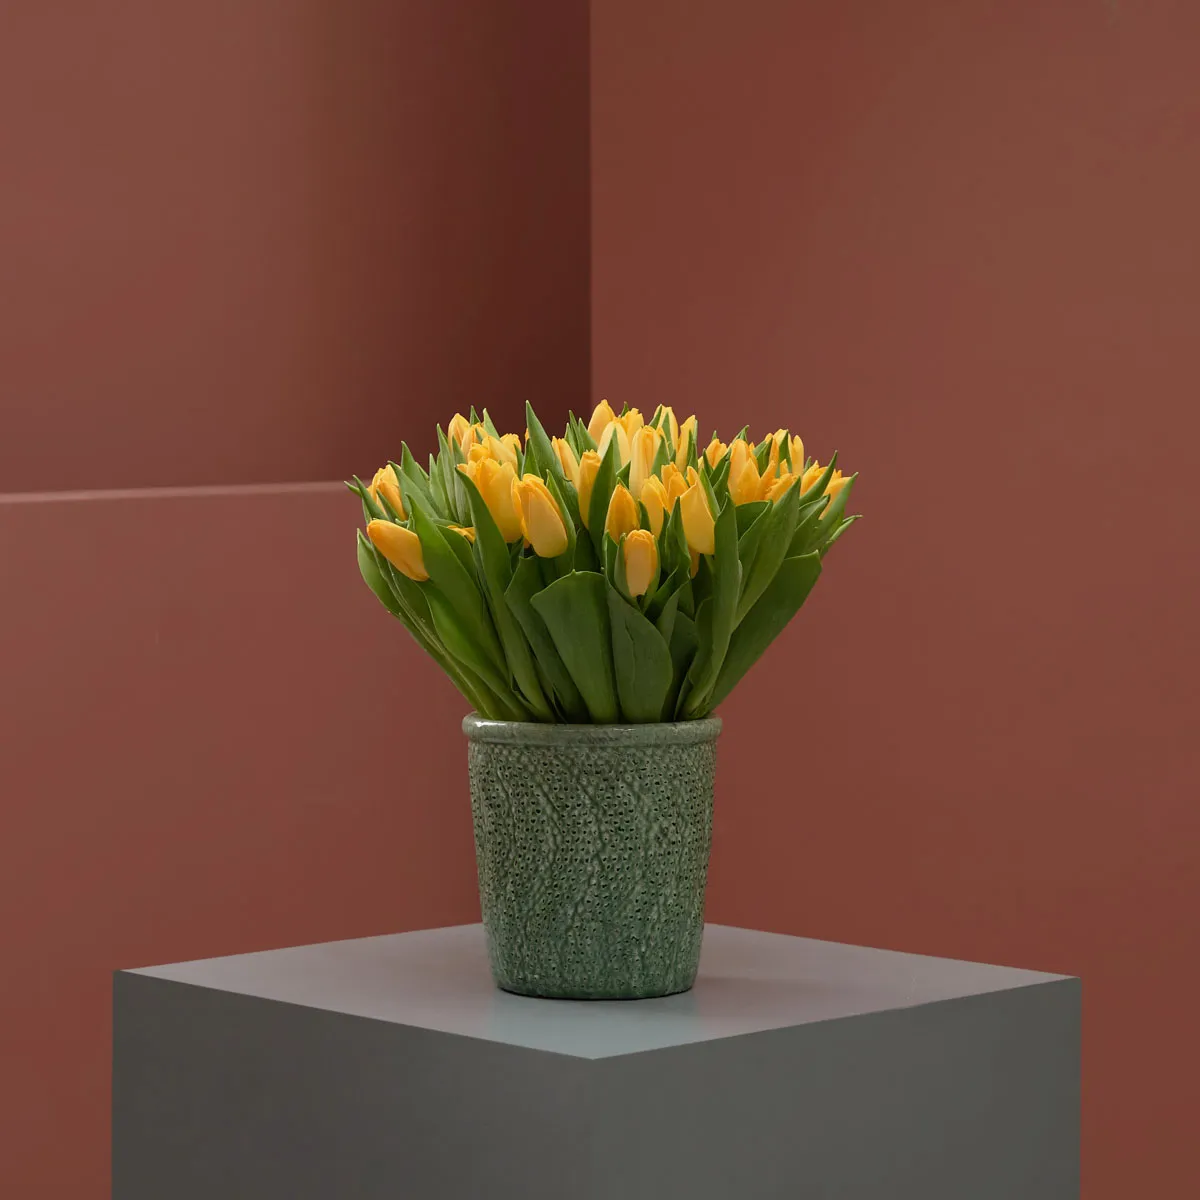 Dazzling Yellow on a Vase